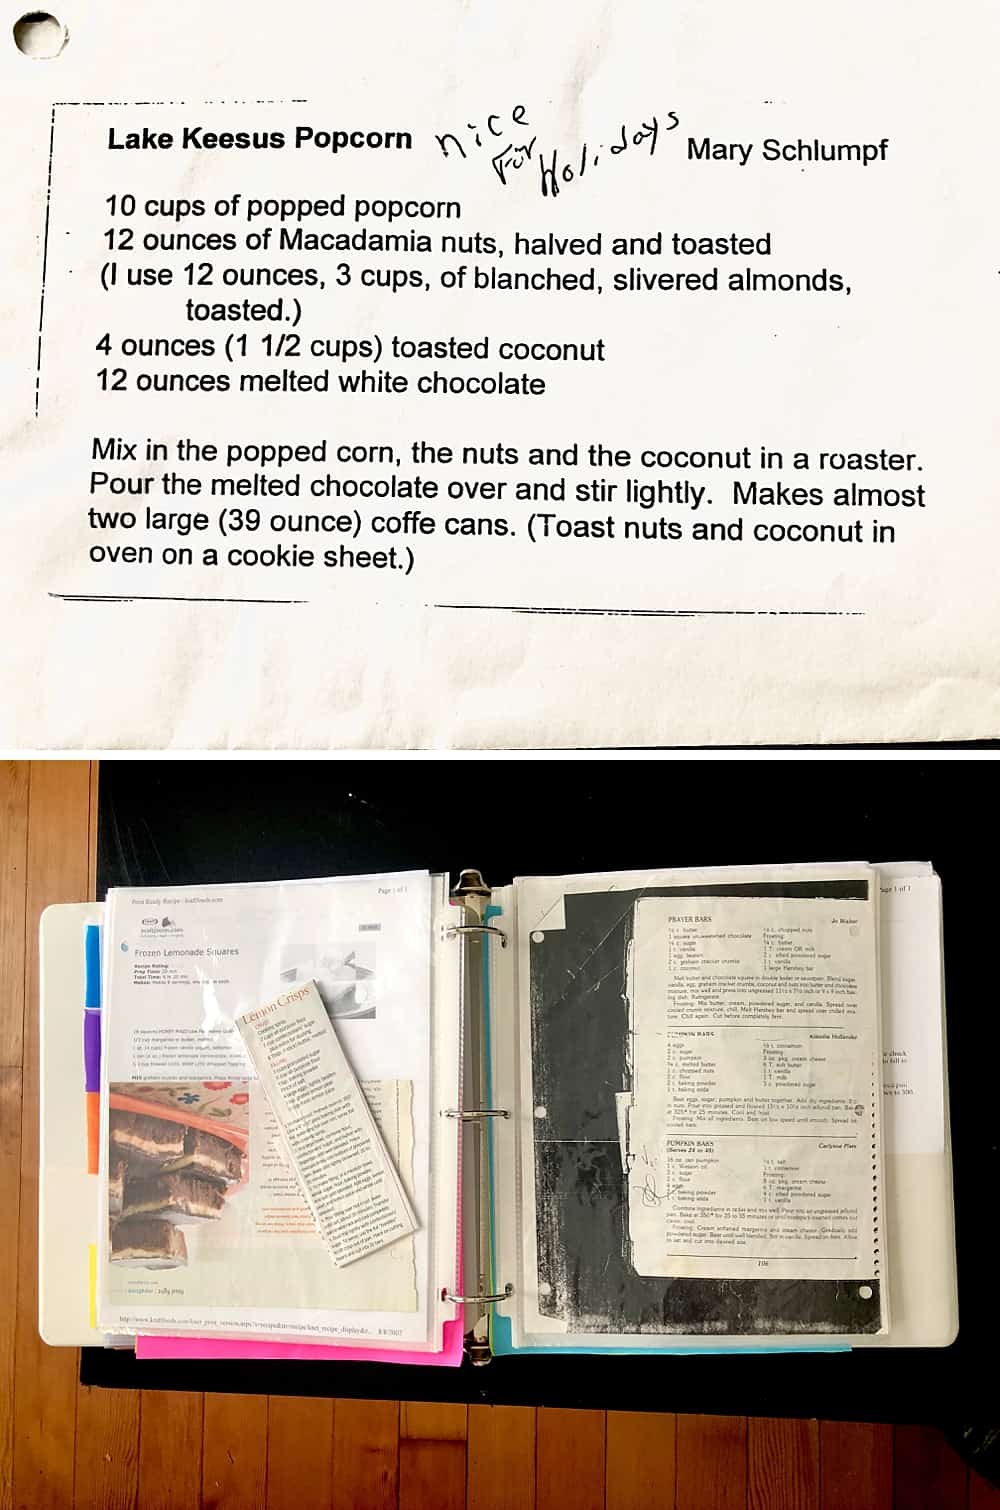 A collage featuring two images: an old photocopied recipe for white chocolate popcorn and a binder filled with old recipes.